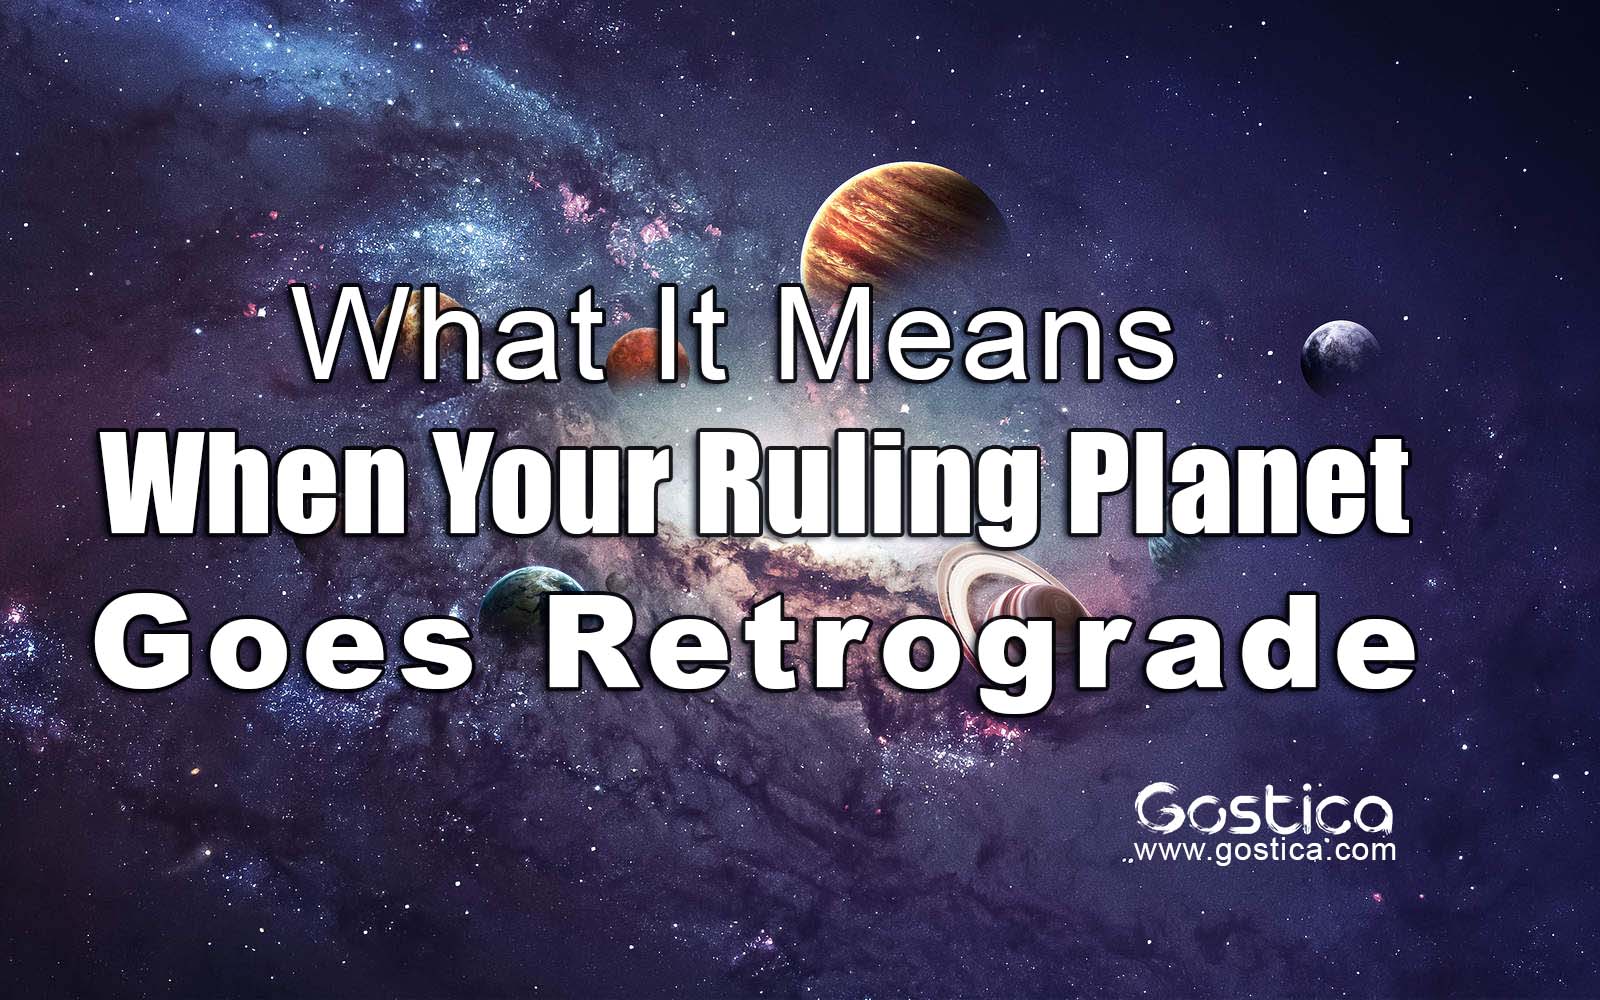 What-It-Means-When-Your-Ruling-Planet-Goes-Retrograde.jpg